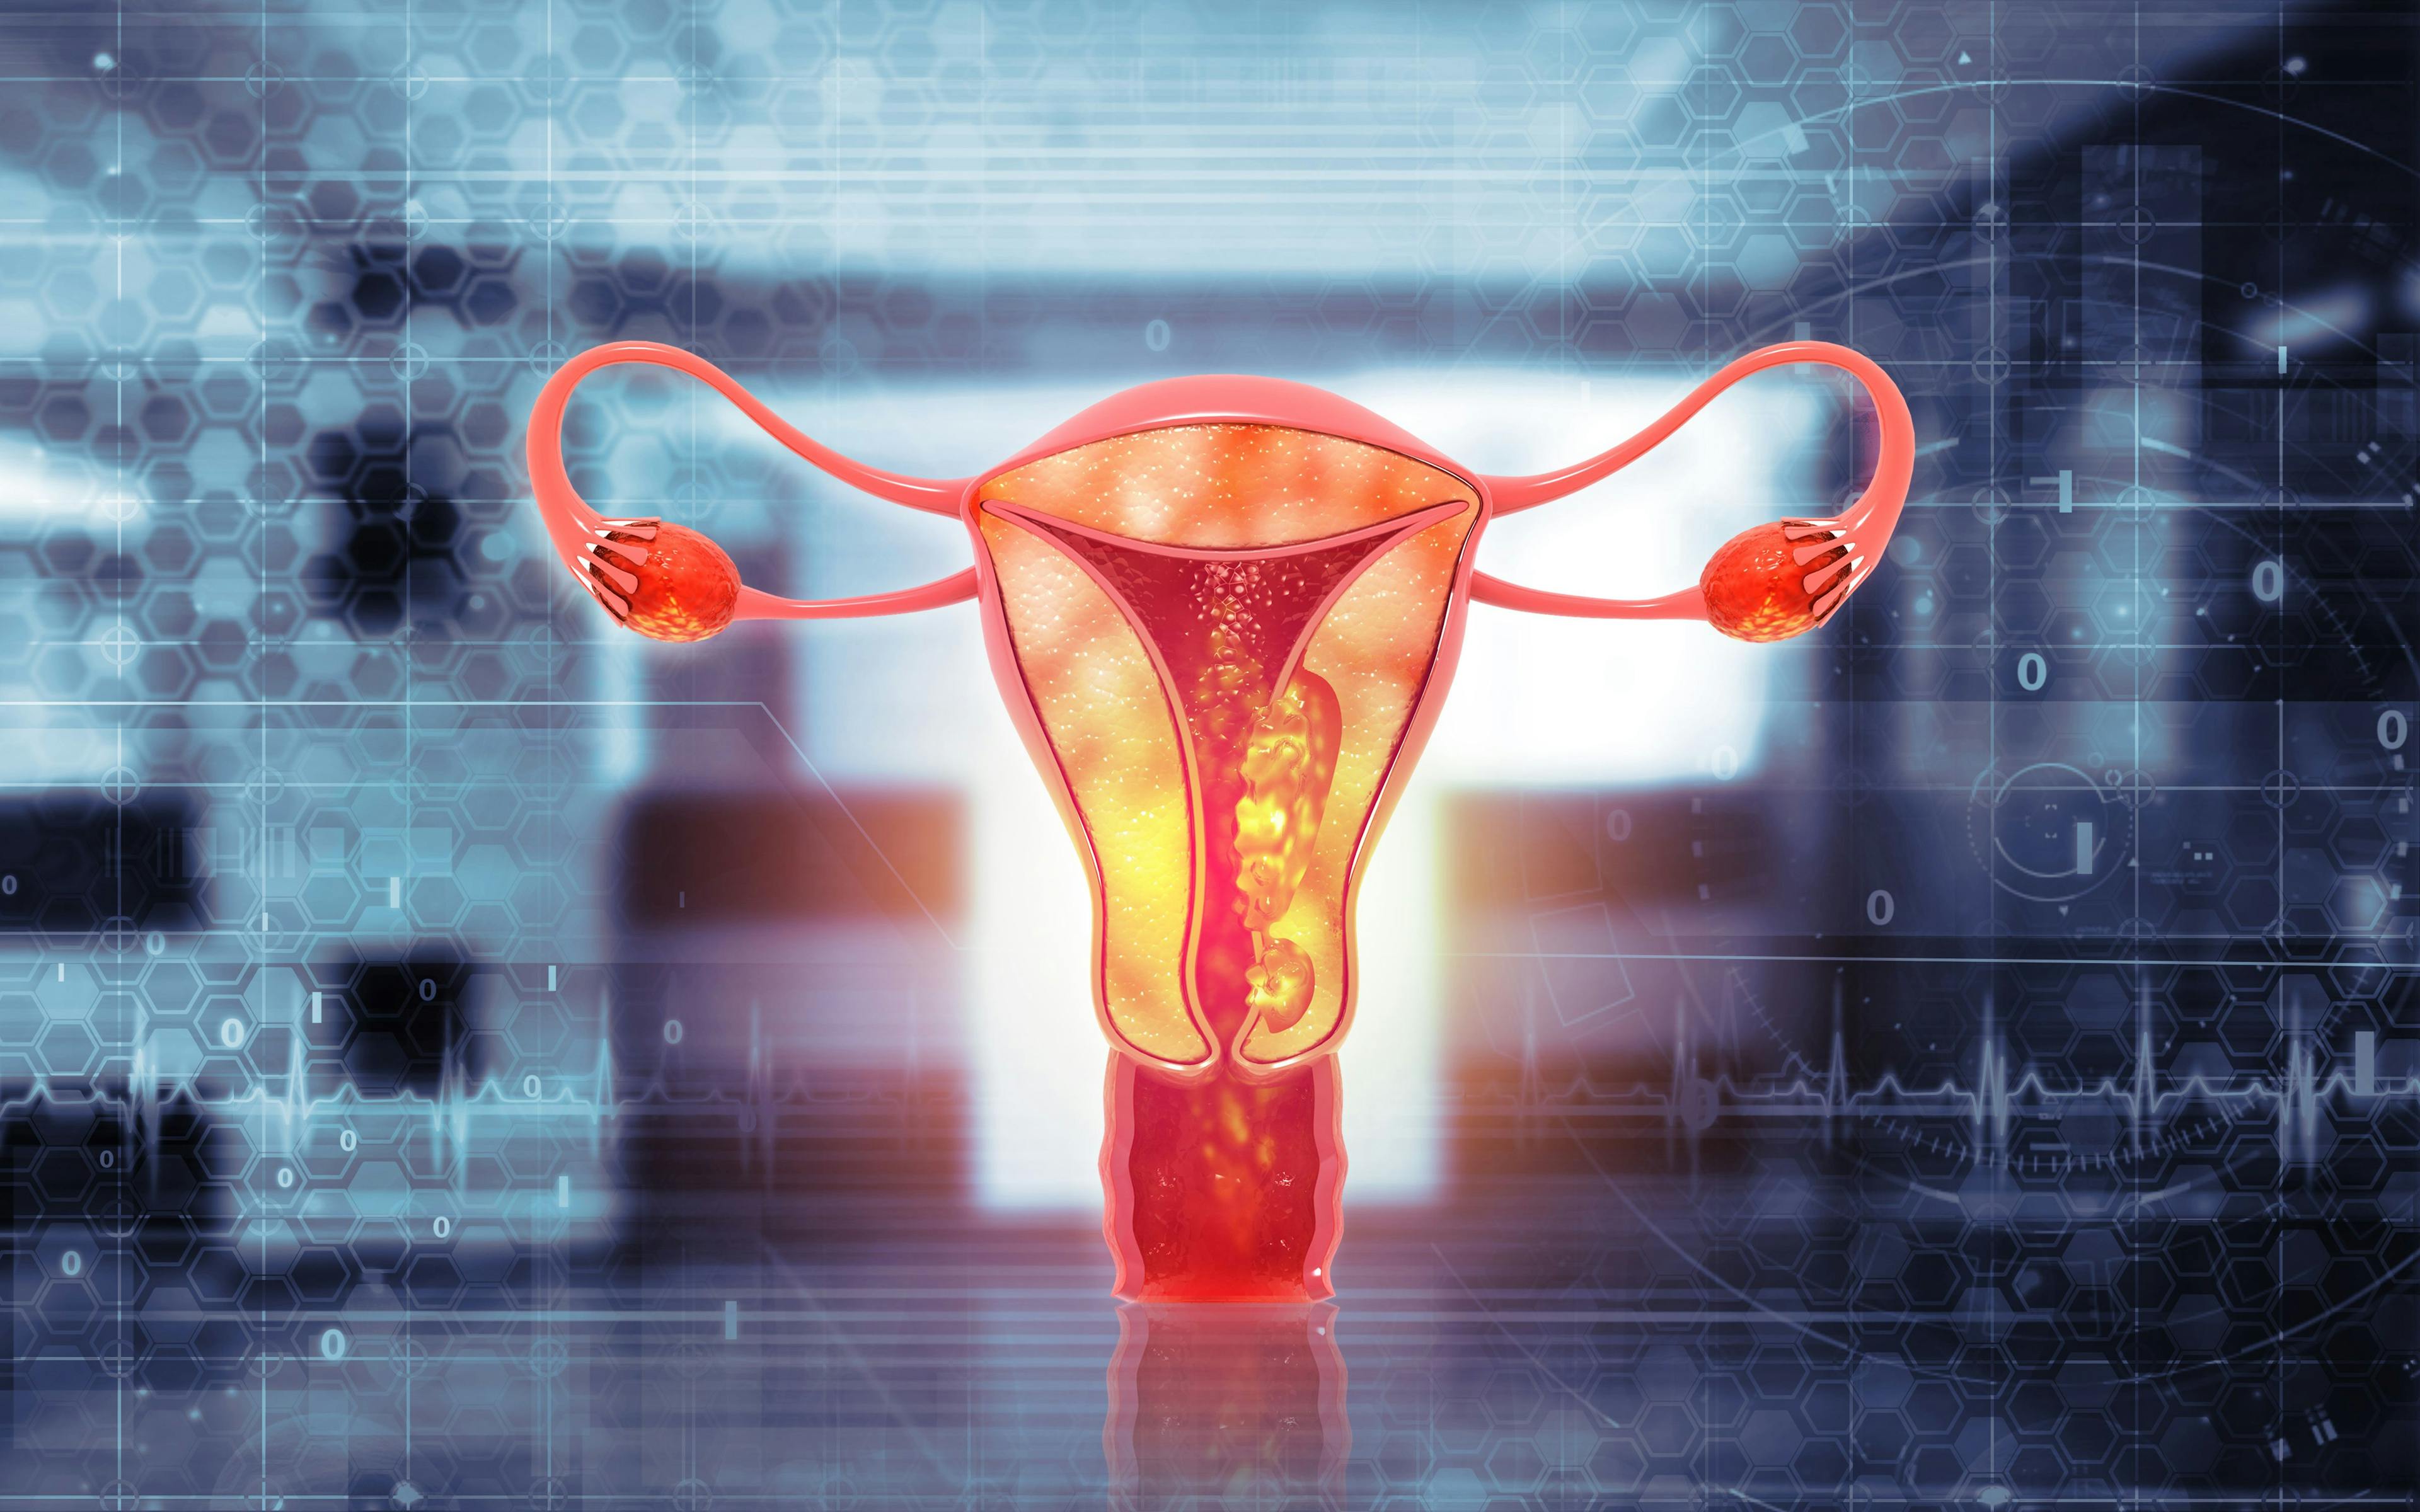 Female reproductive system diseases. Uterus cancer and endometrial malignant tumor as a uterine medical concept. 3d illustration: © Crystal Light - stock.adobe.com